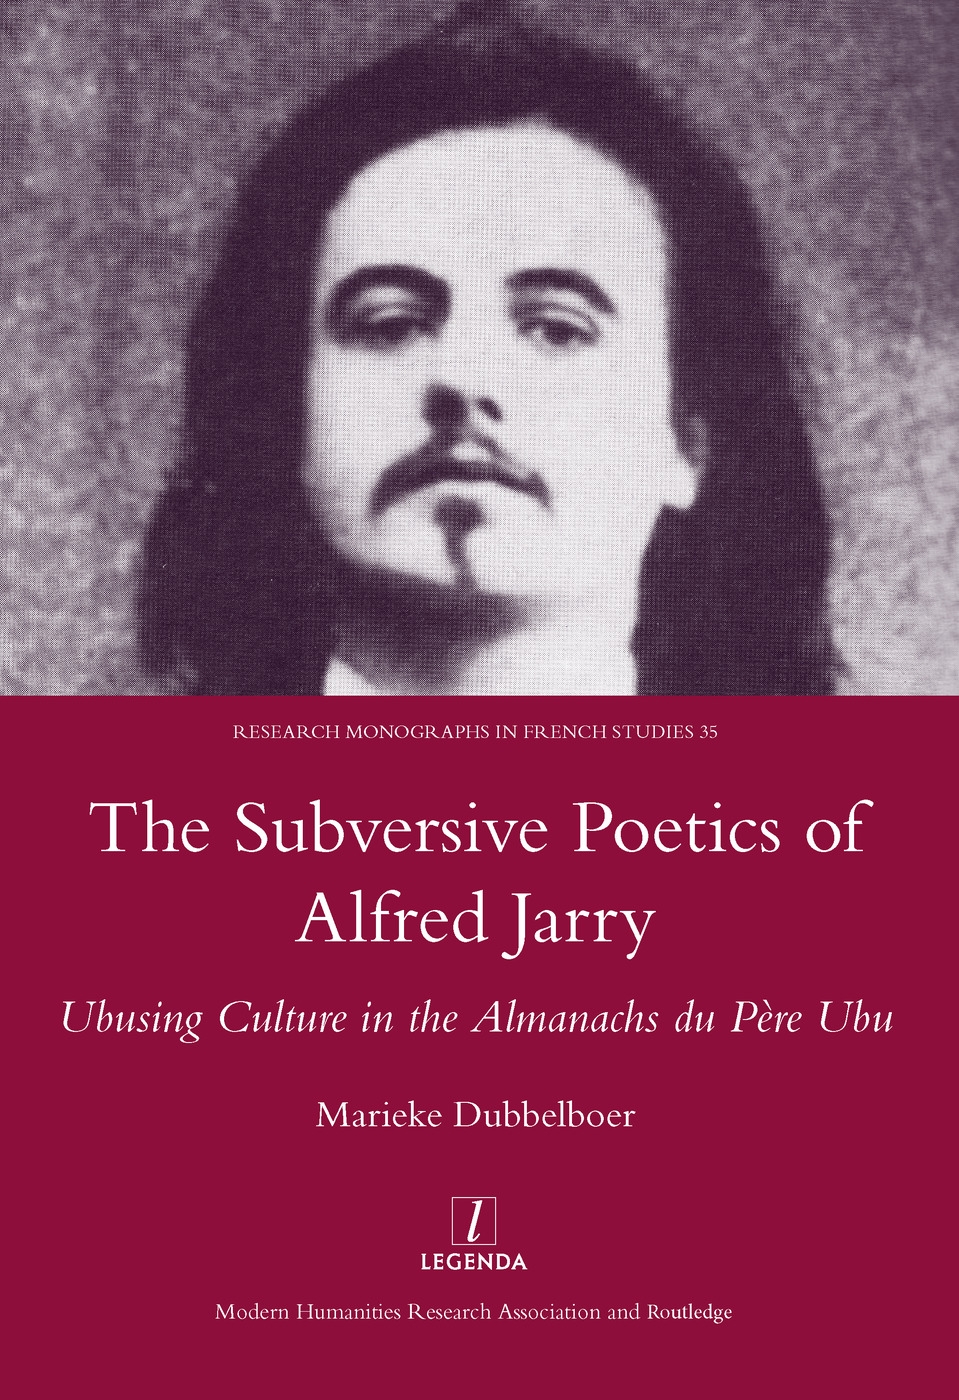 The Subversive Poetics of Alfred Jarry: Ubusing Culture in the Almanachs Du Pere Ubu